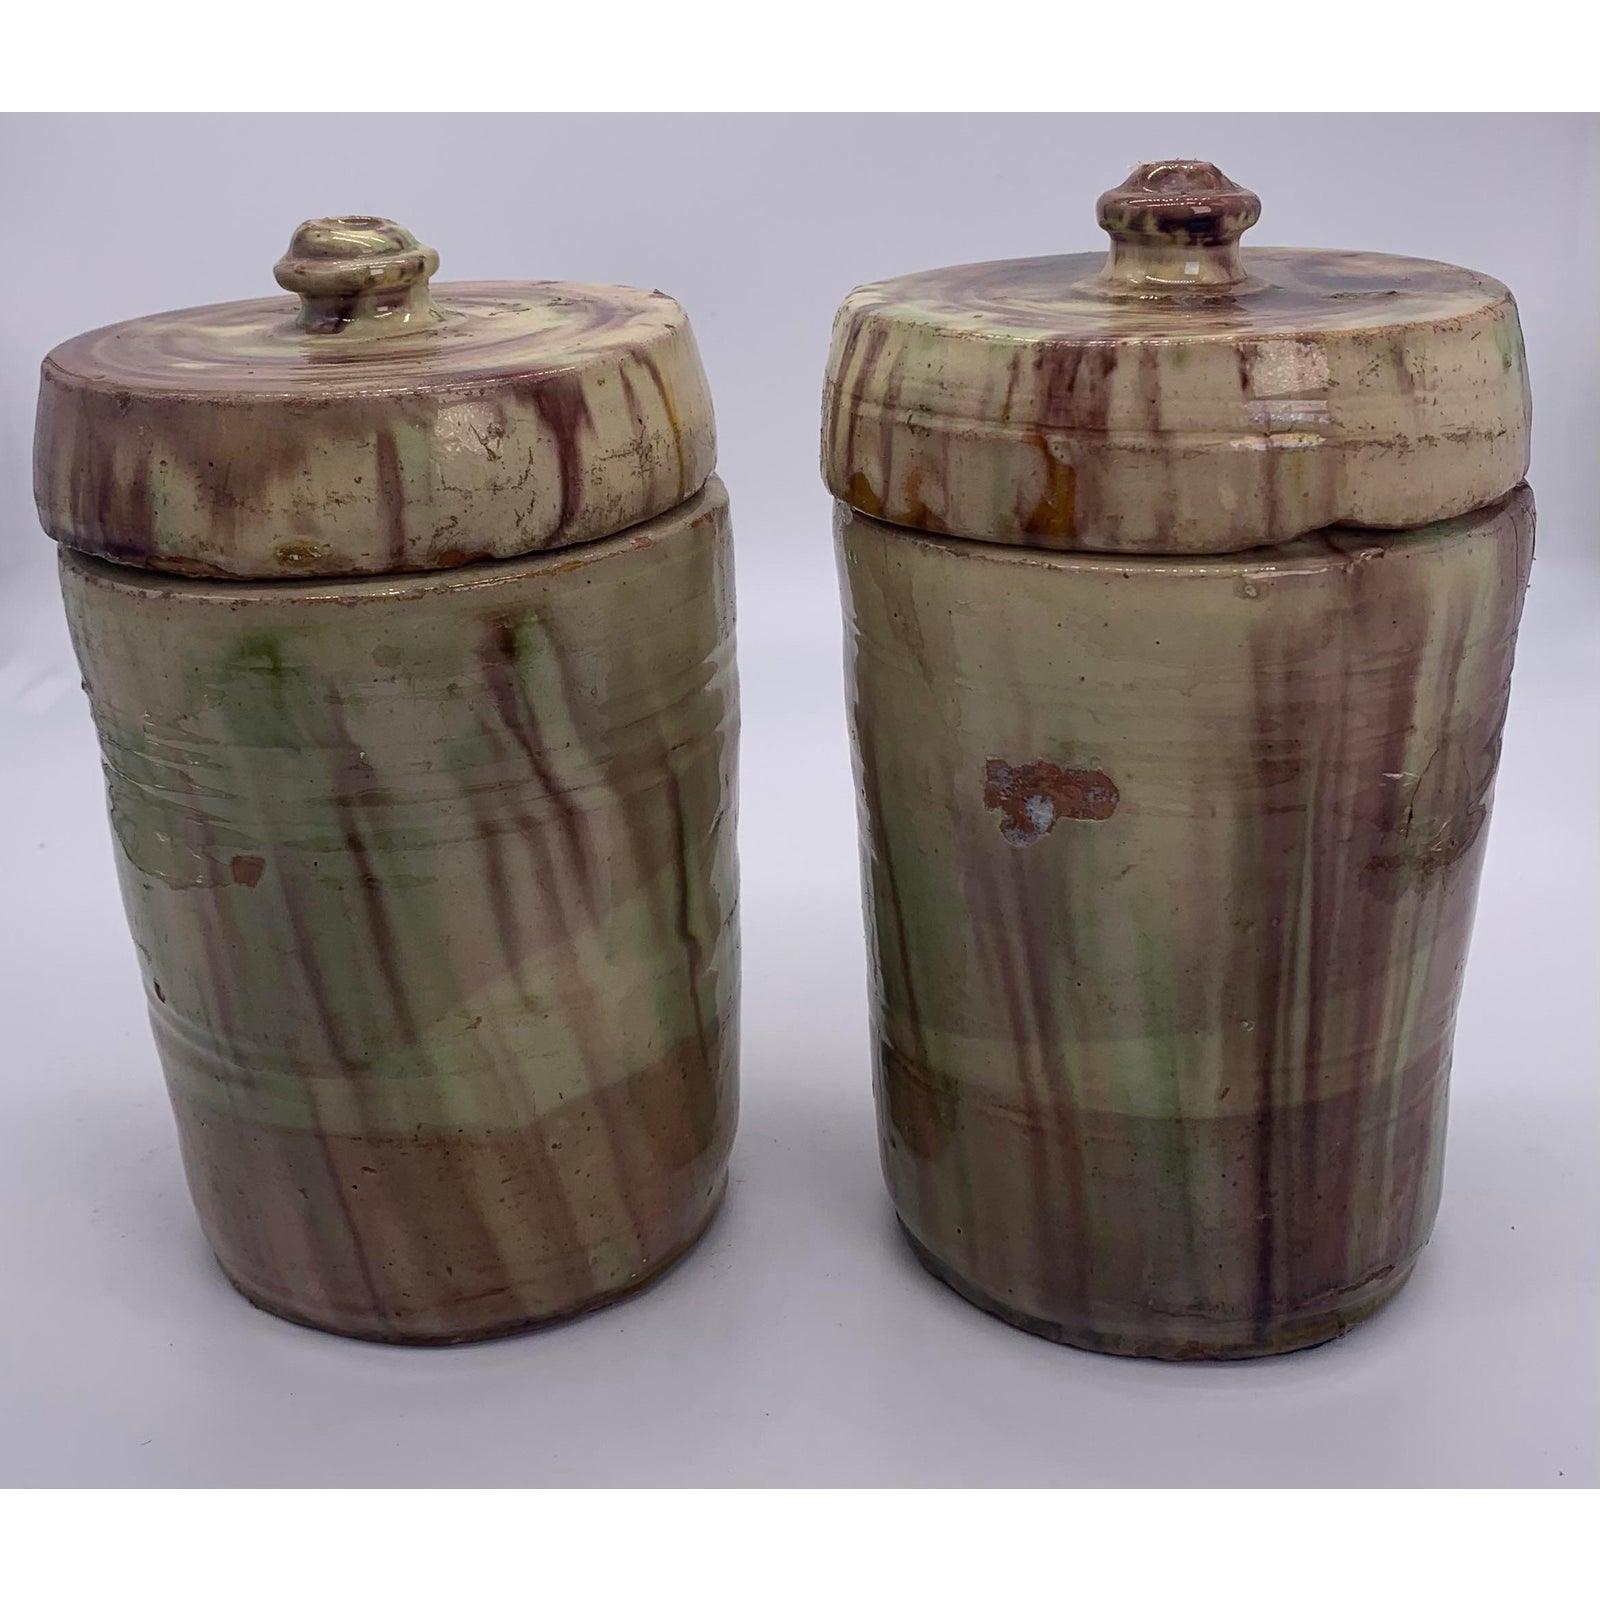 Lidded Spice Jars - The White Barn Antiques